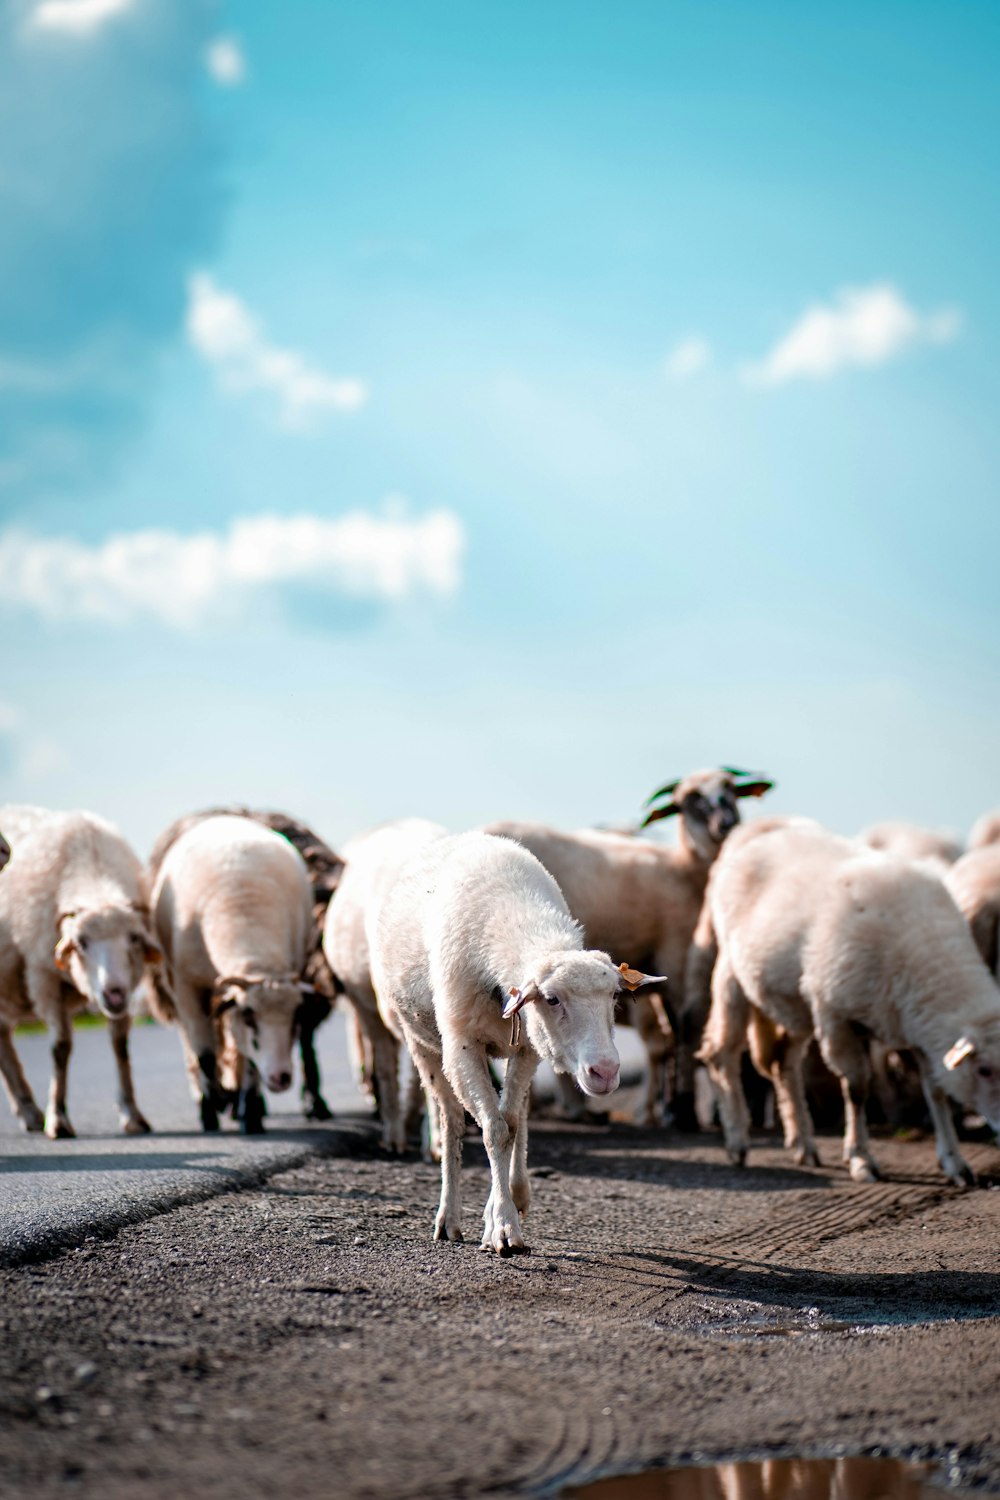 a herd of sheep walking down a road